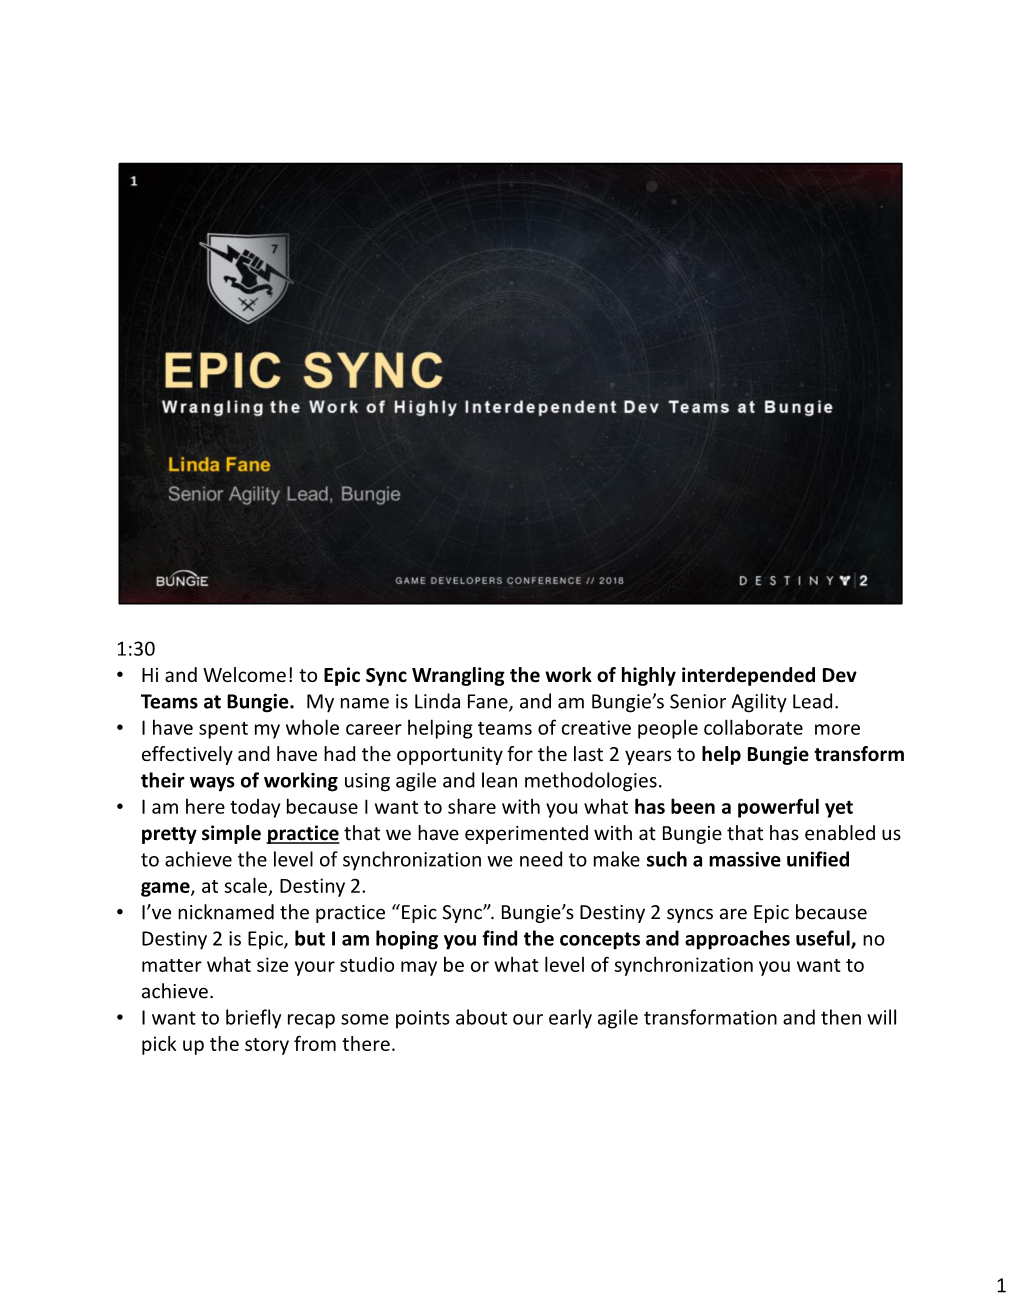 To Epic Sync Wrangling the Work of Highly Interdepended Dev Teams at Bungie